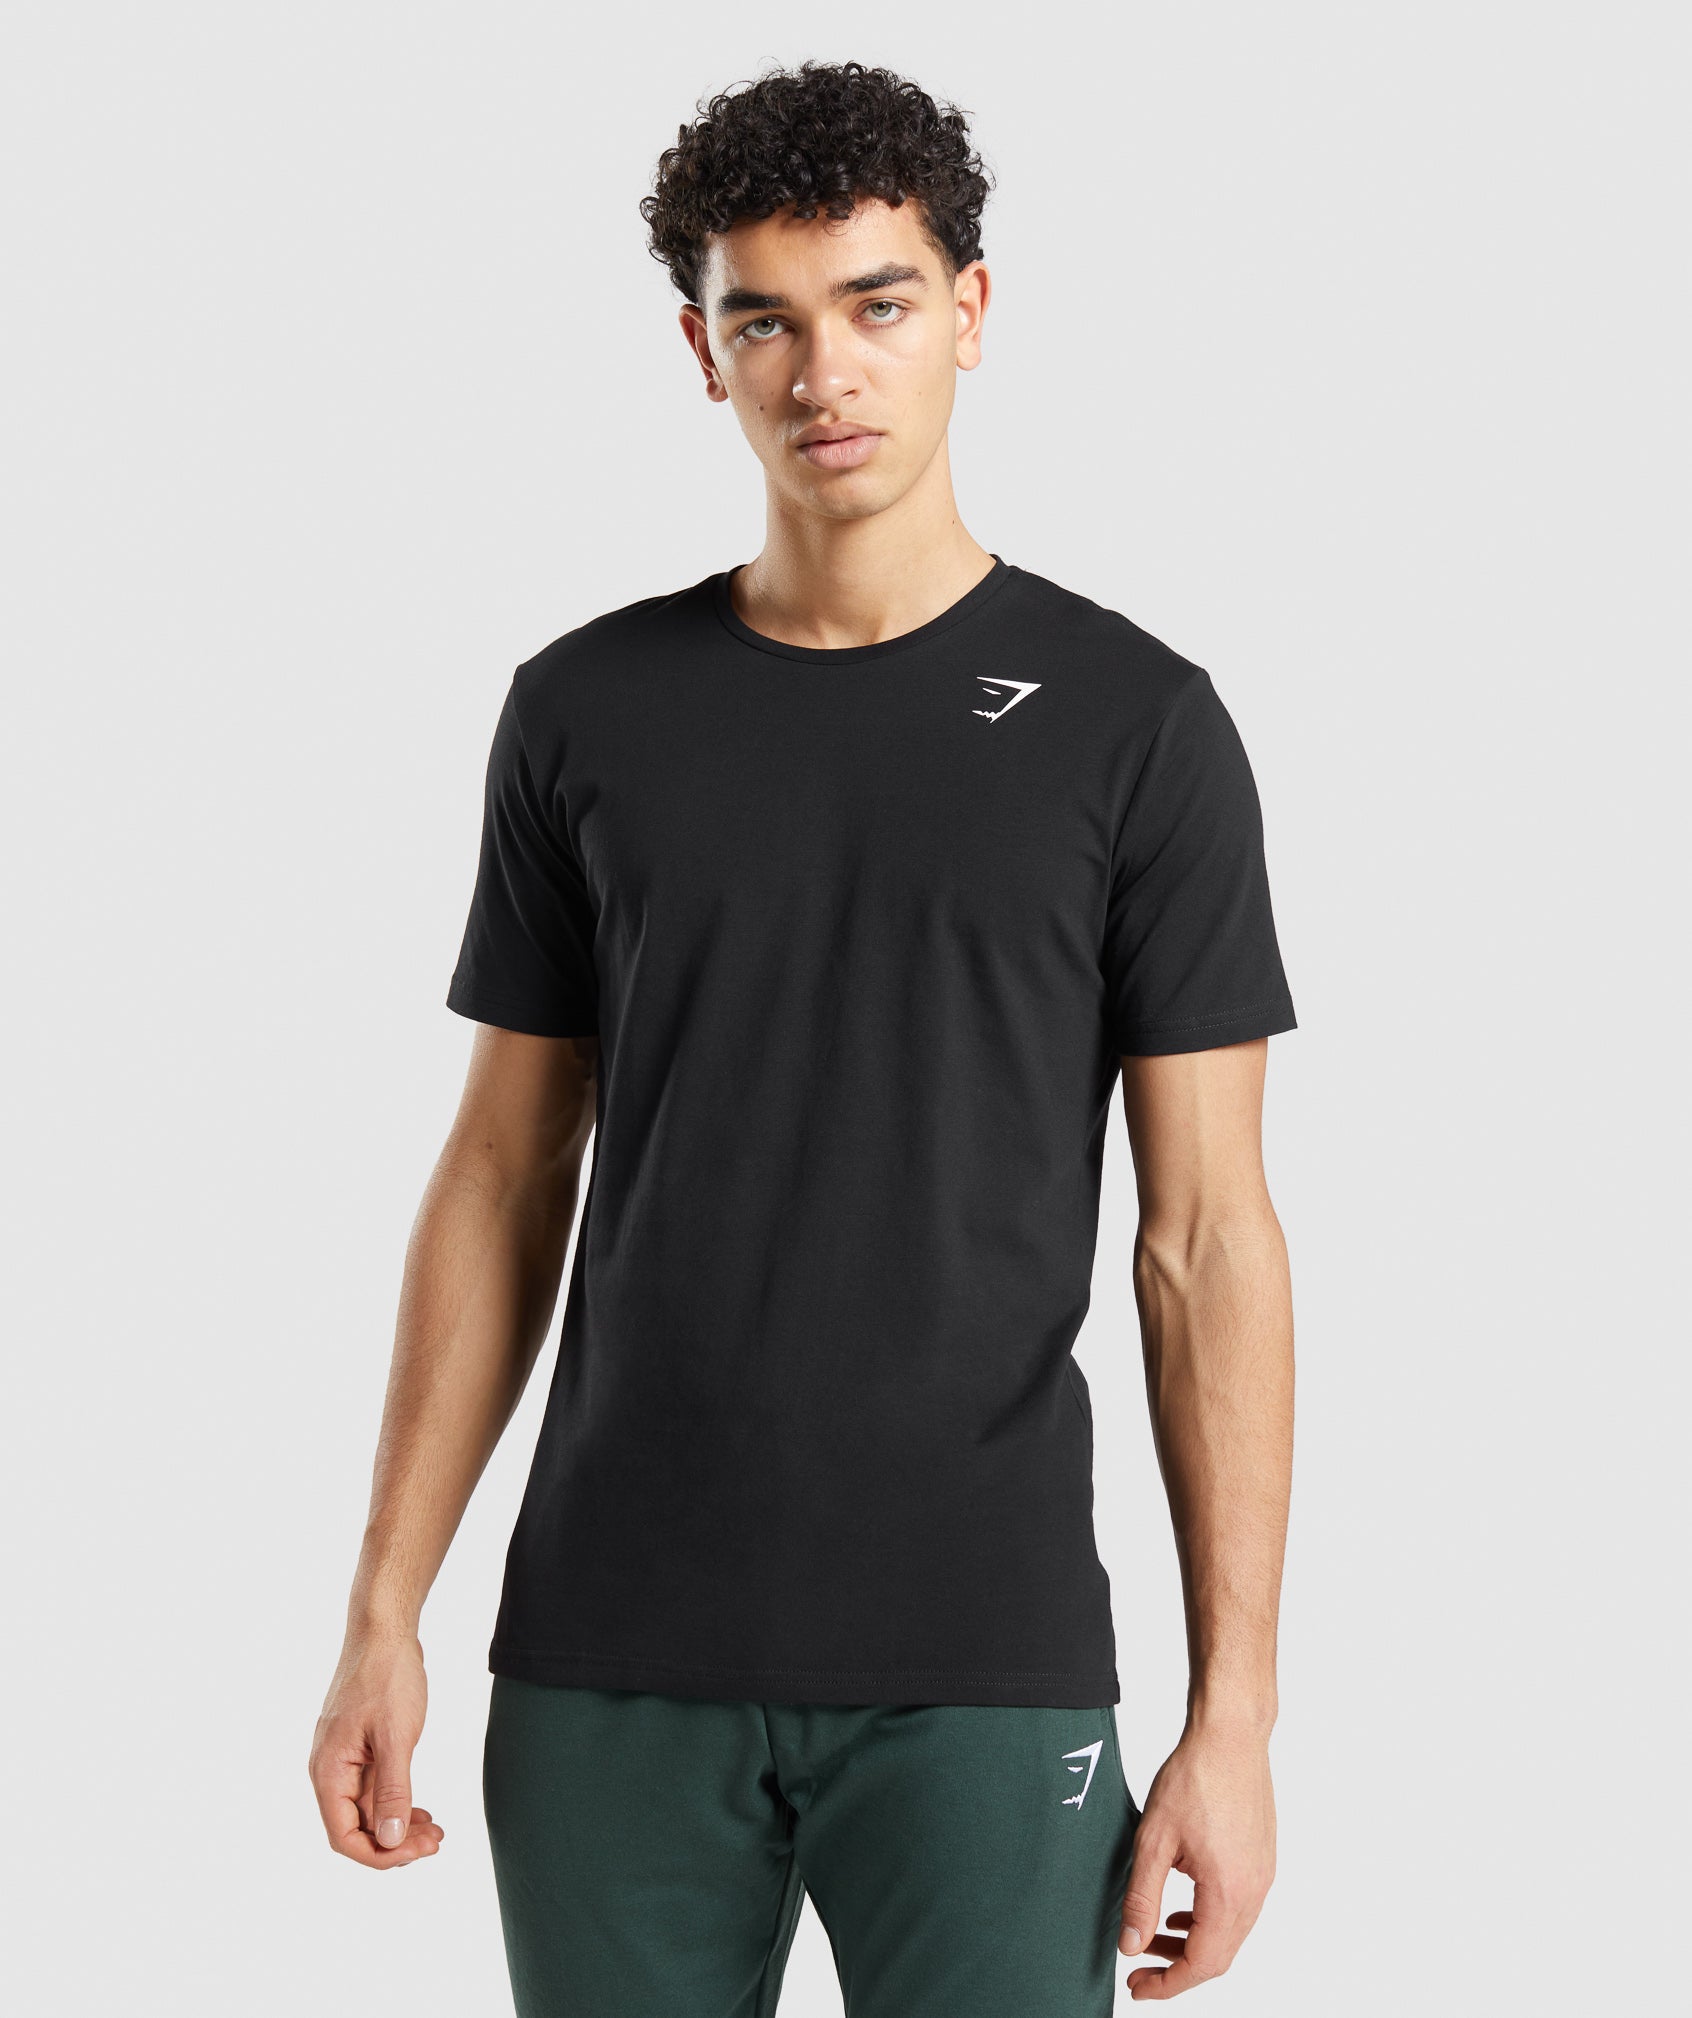 Essential T-Shirt in Black is out of stock